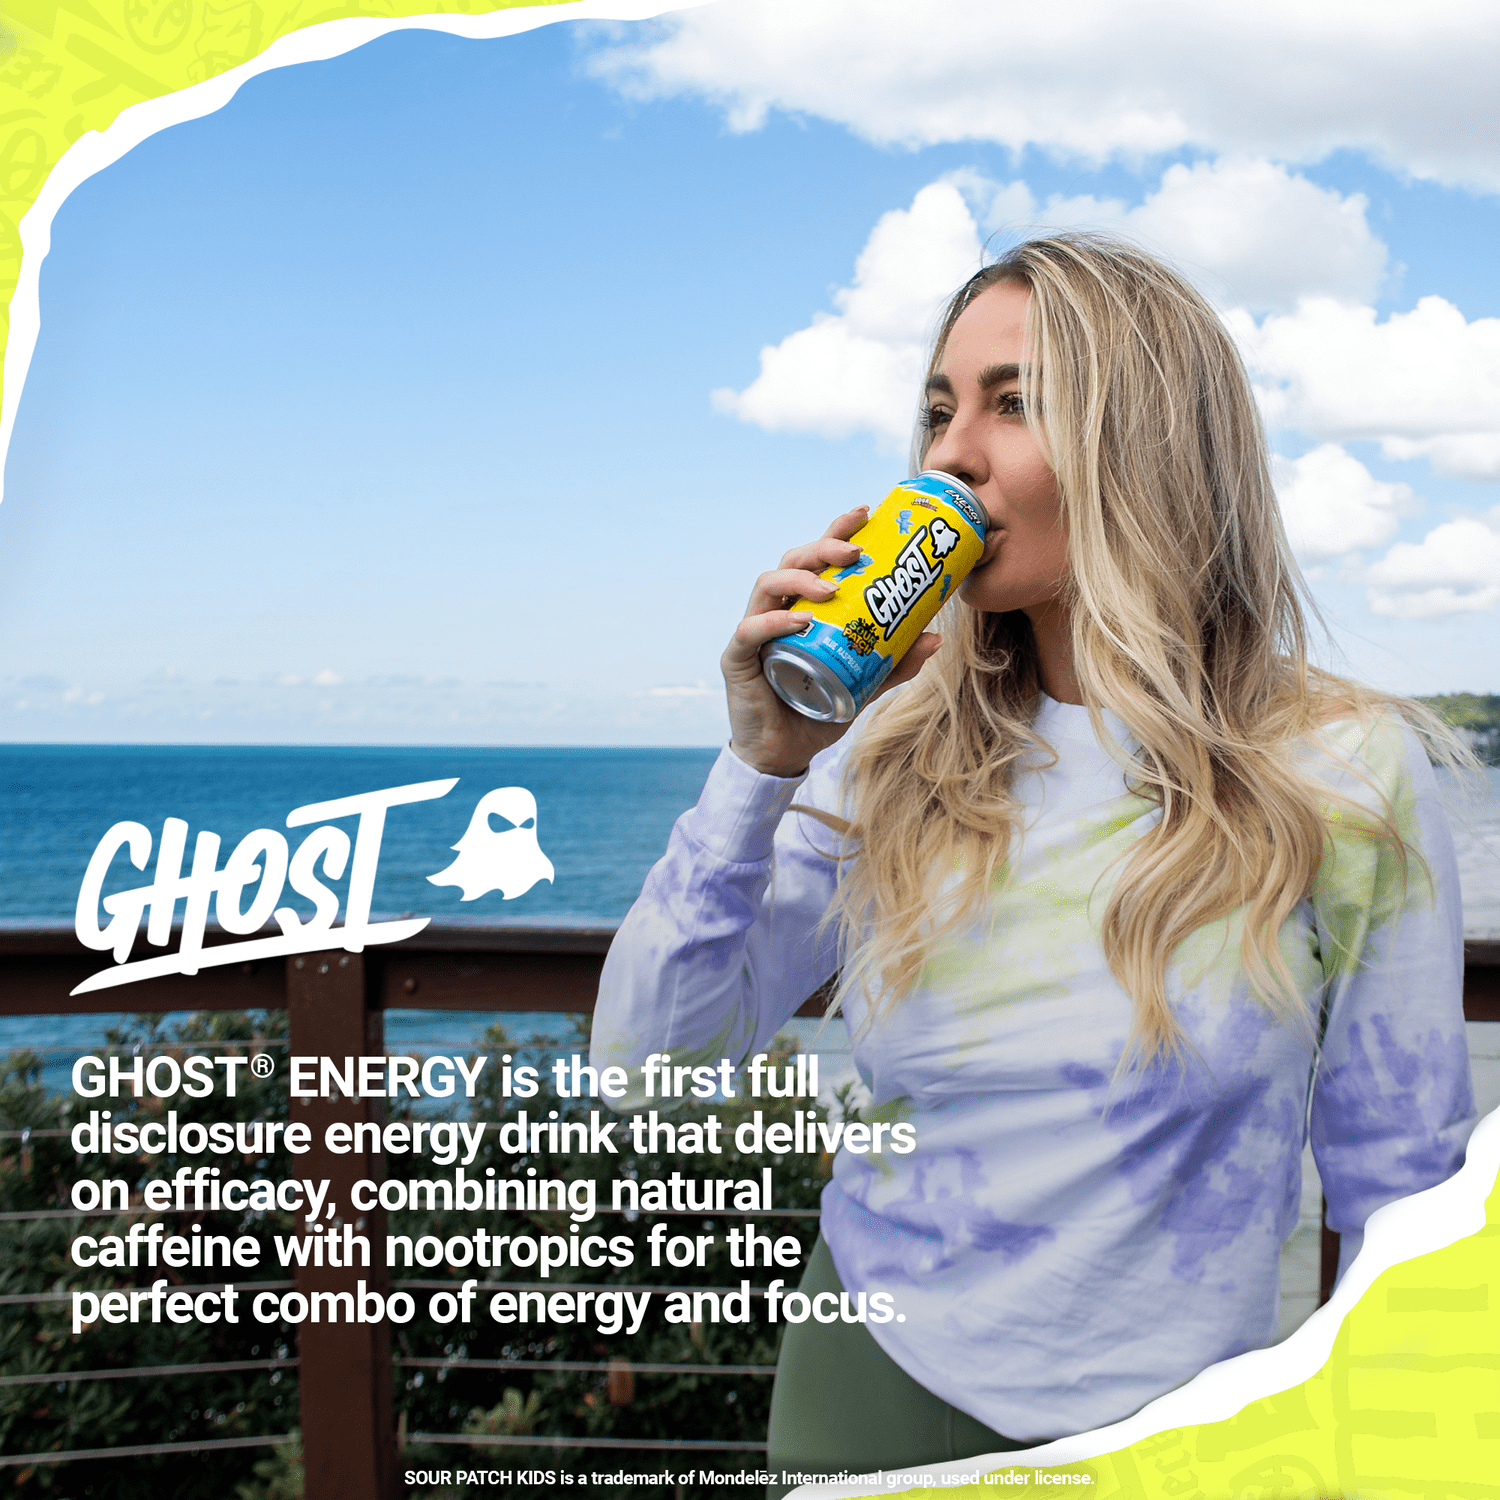 GHOST Hydration Packets, Sour Patch Kids Blue Raspberry, 24 Sticks, Electrolyte  Powder - Drink Mix Supplement with Magnesium, Potassium, Calcium, Vitamin C  - Vegan, Free of Soy, Sugar & Gluten Sour Patch